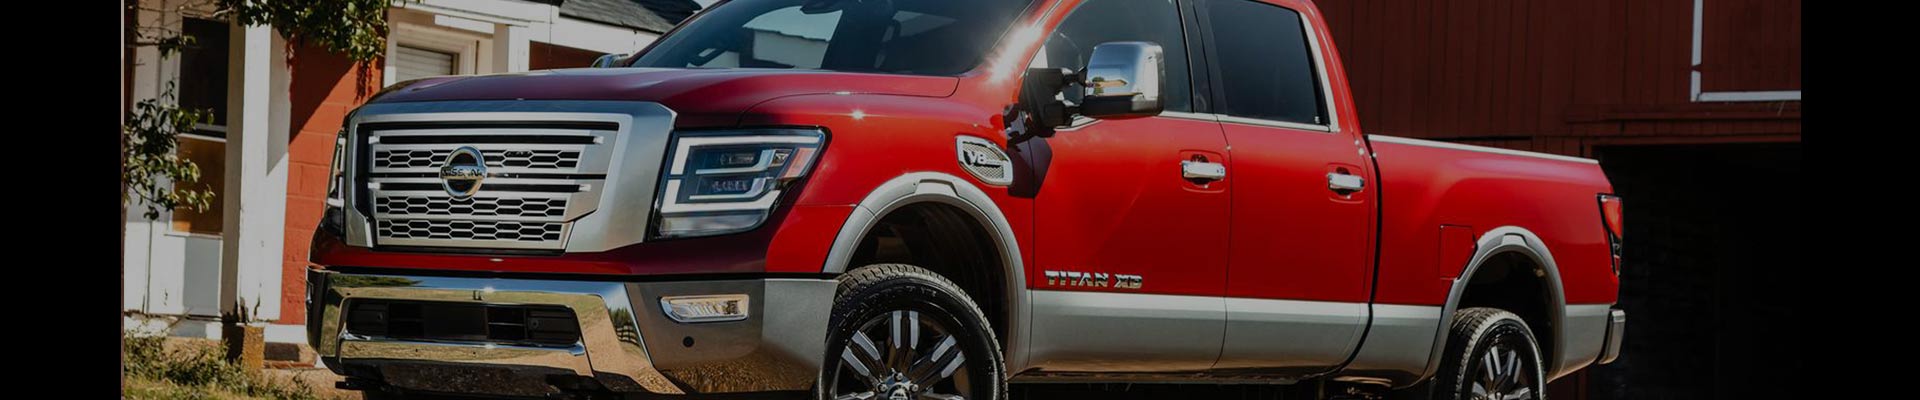 Shop Replacement and OEM 2020 Nissan Titan XD Parts with Discounted Price on the Net